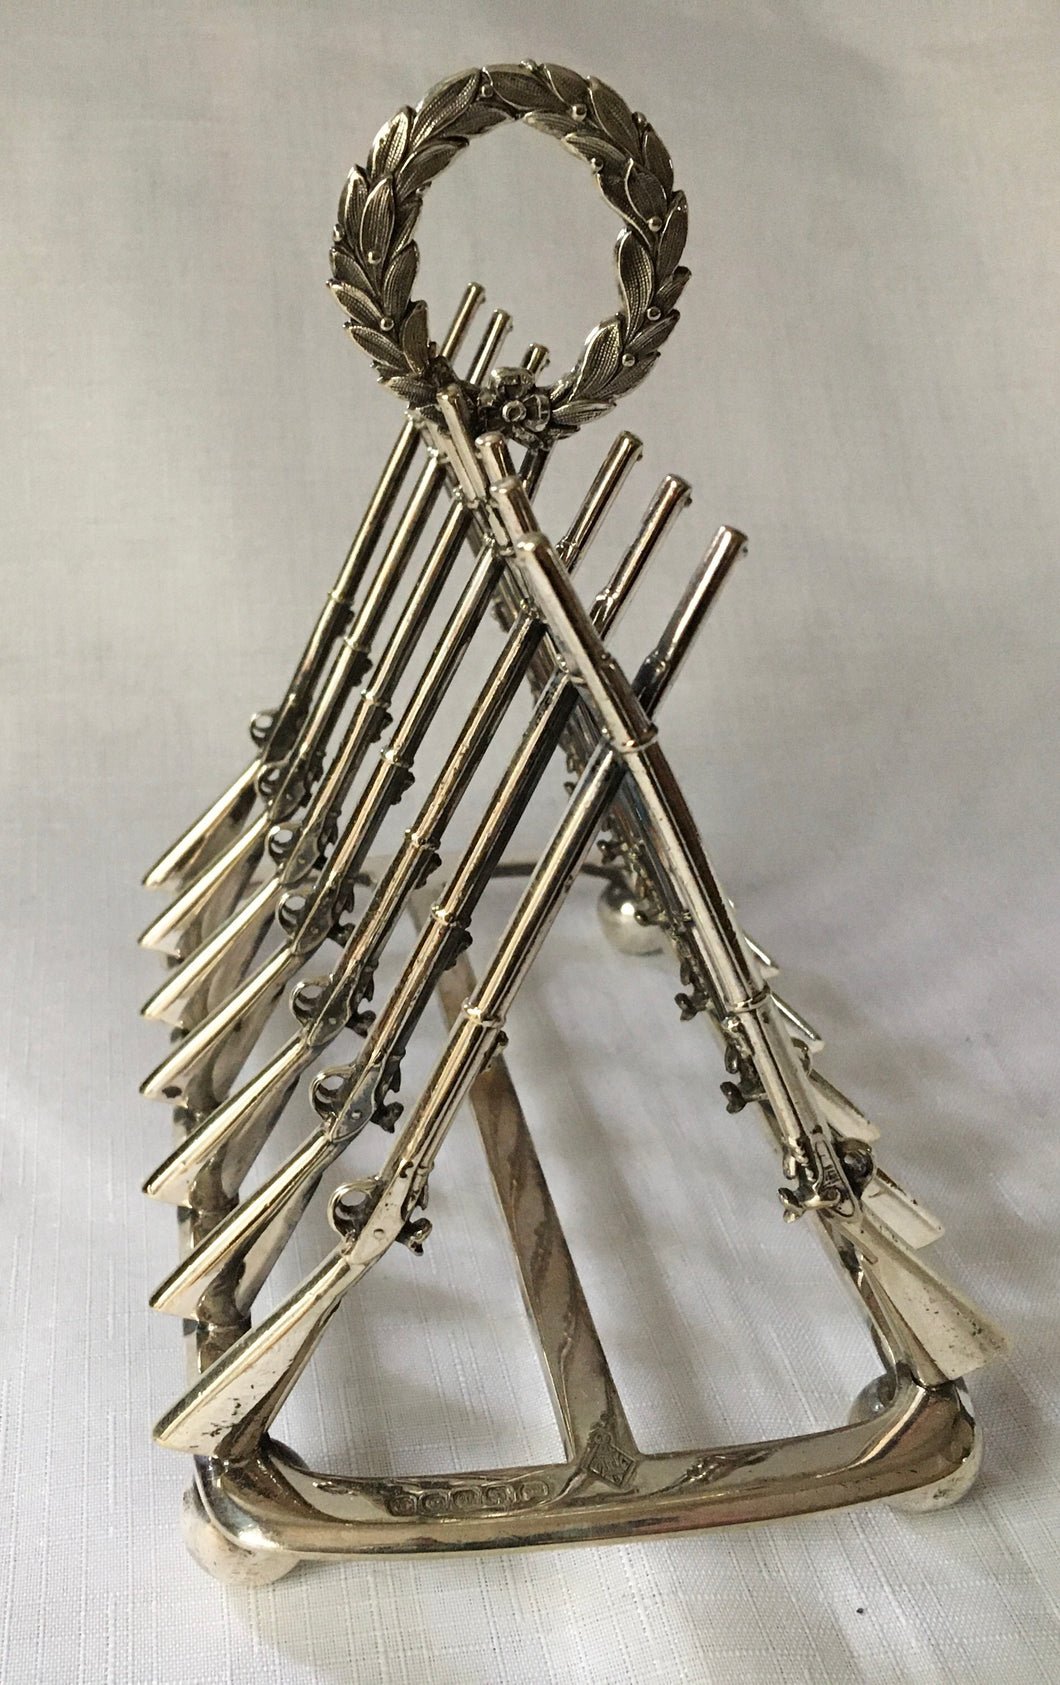 Victorian novelty silver plated toast rack in the form of crossed muskets.